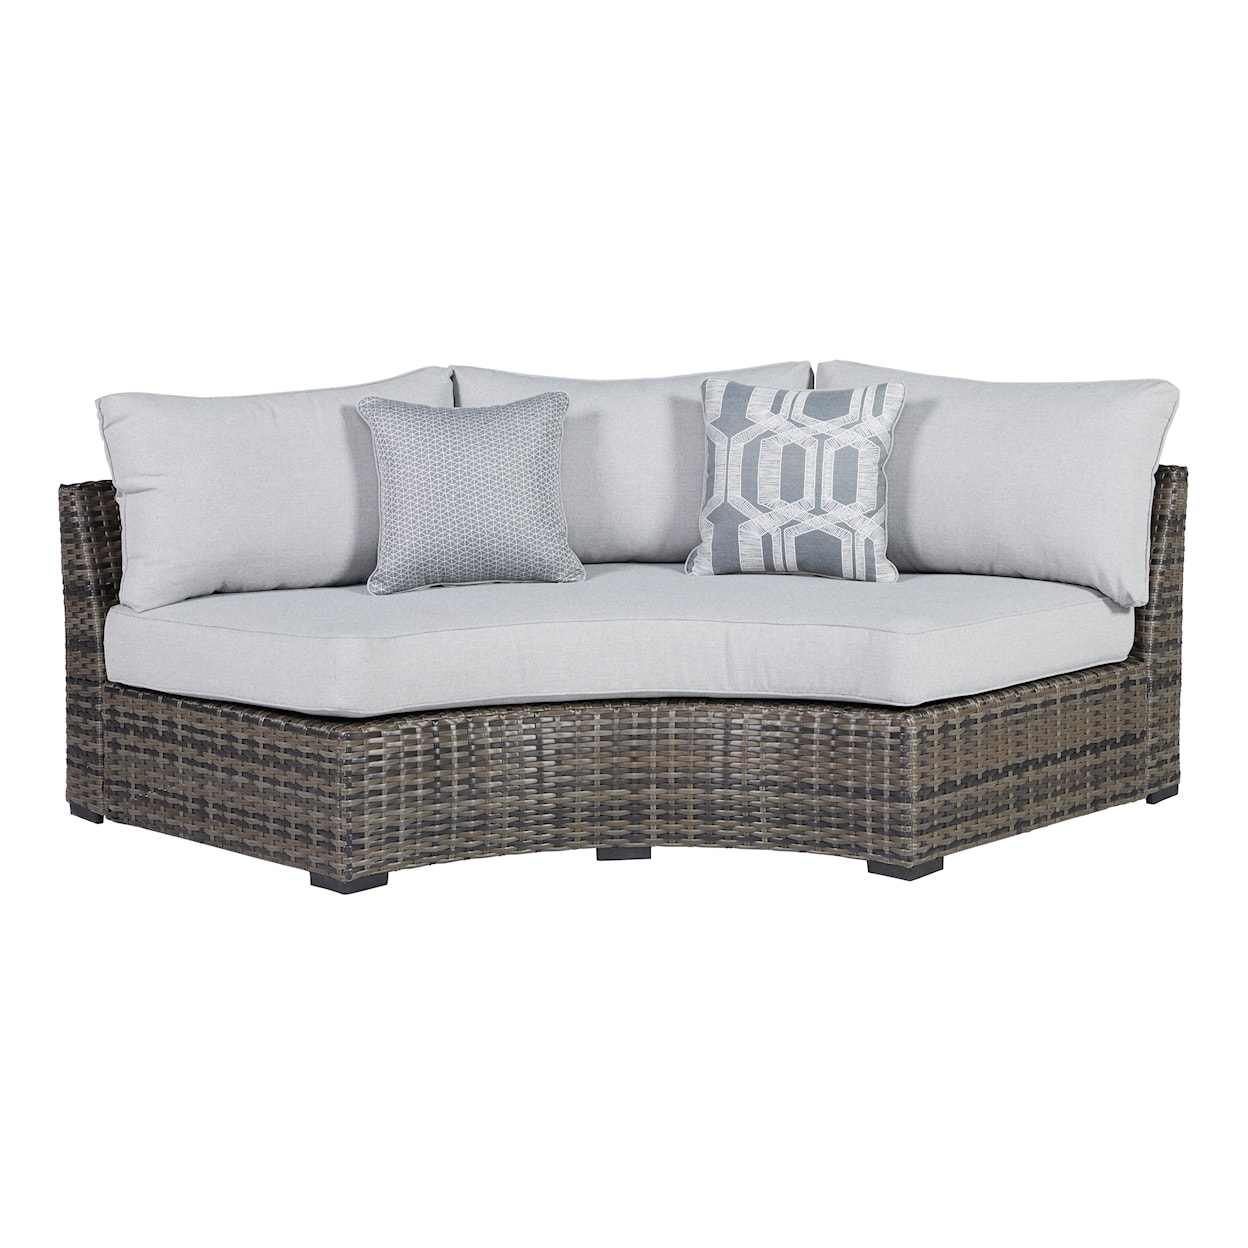 Signature Design Harbor Court Curved Loveseat with Cushion